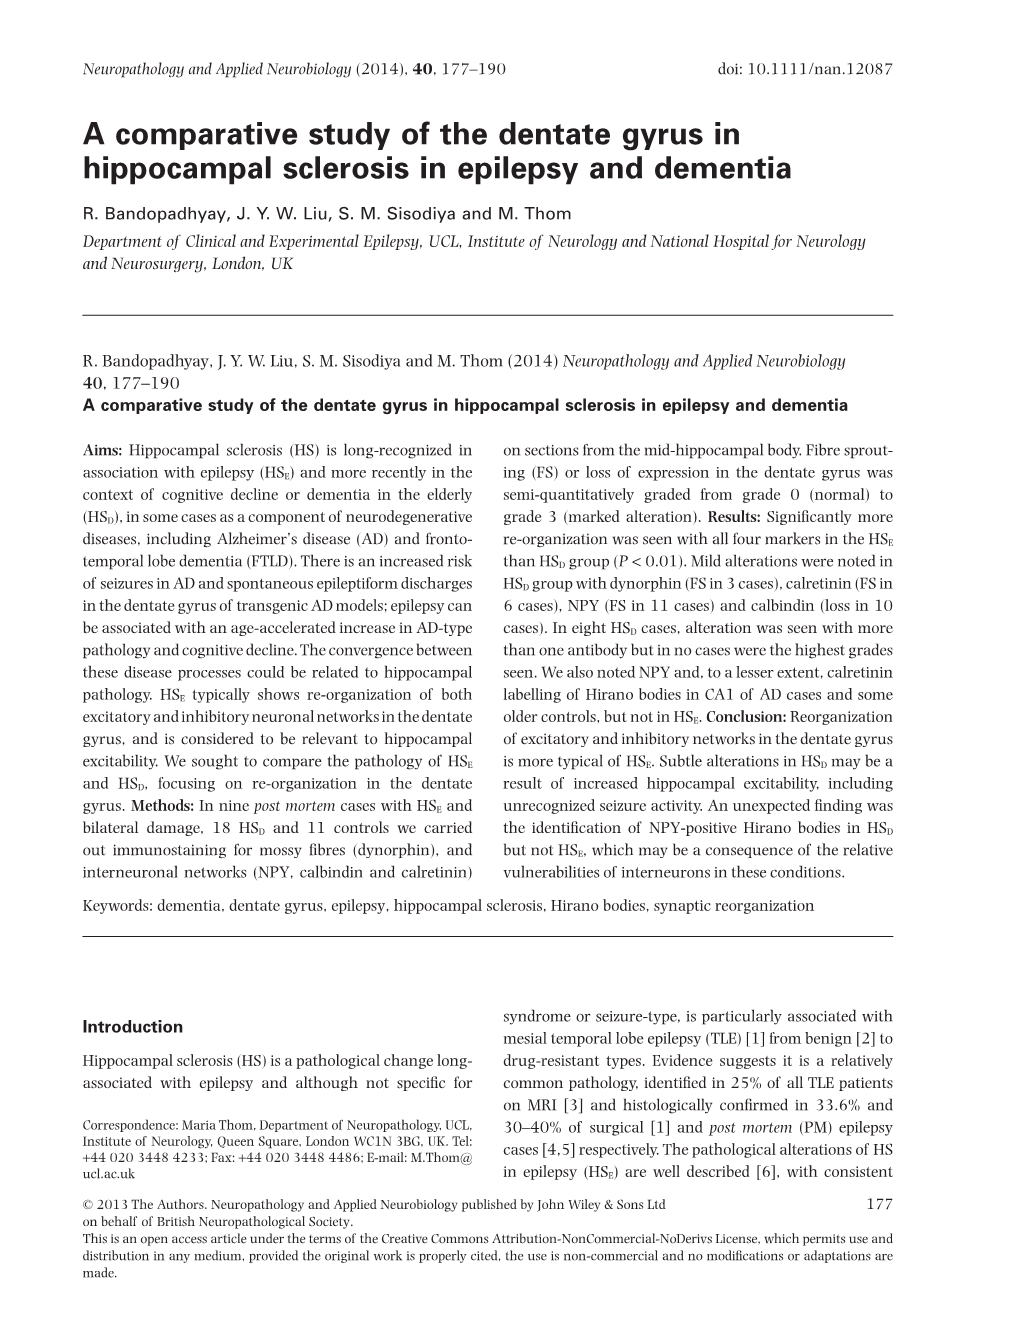 A Comparative Study of the Dentate Gyrus in Hippocampal Sclerosis in Epilepsy and Dementia